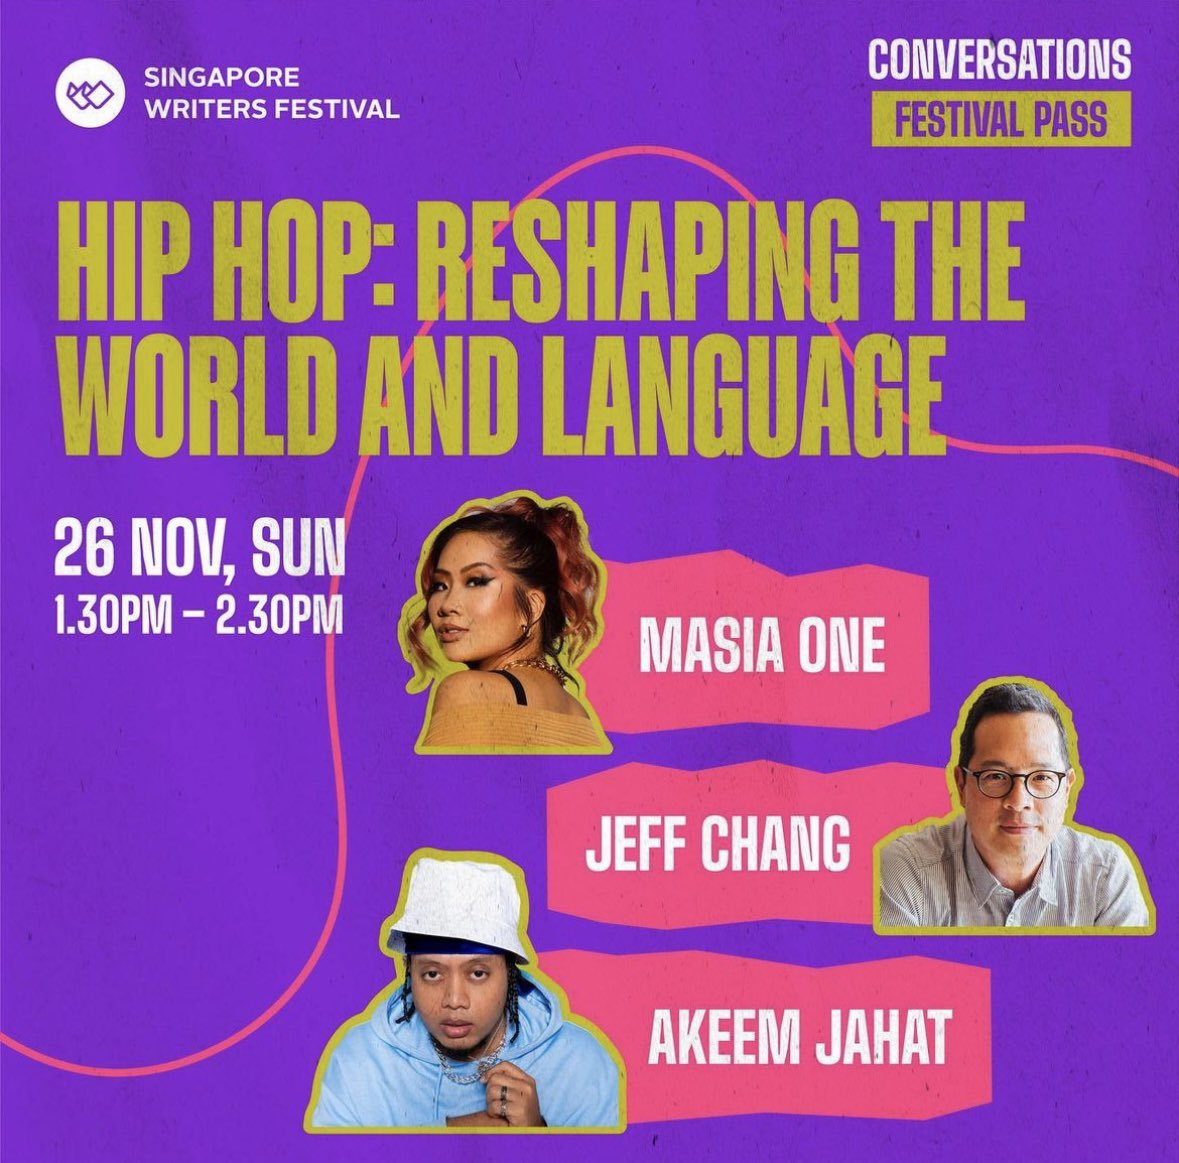 Singapore! Malaysia! Get down for #HipHop50 at @sgwritersfest with us: In A Tiny Room w/@daddydark! Hip-Hop + The World w/@masiaone + #AkeemJahat! Deets + Tix: singaporewritersfestival.com